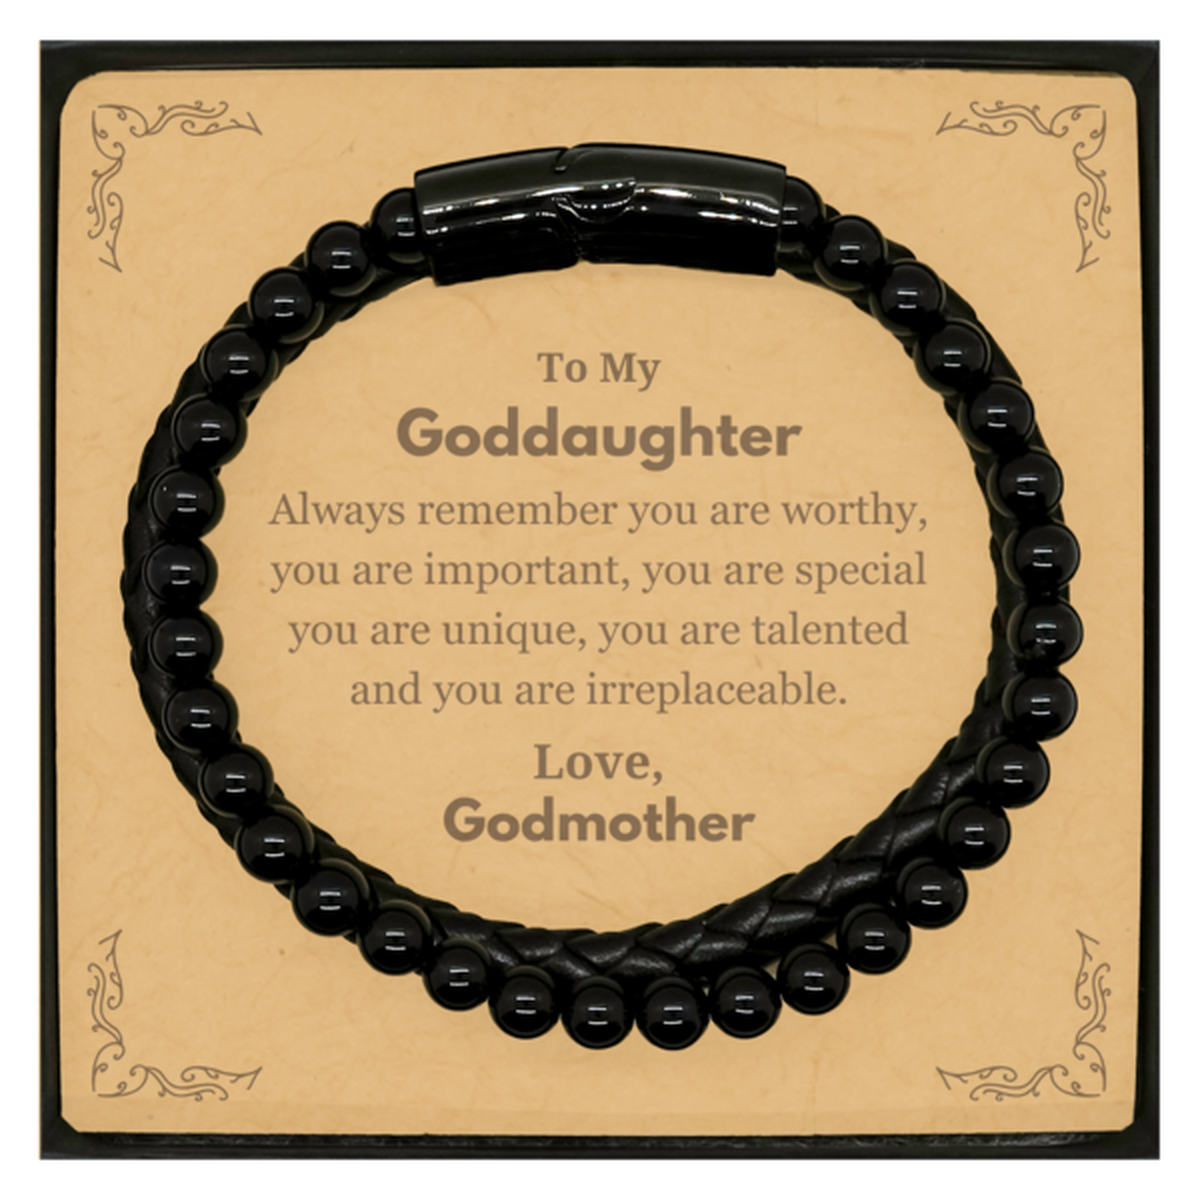 Goddaughter Birthday Gifts from Godmother, Inspirational Stone Leather Bracelets for Goddaughter Christmas Graduation Gifts for Goddaughter Always remember you are worthy, you are important. Love, Godmother